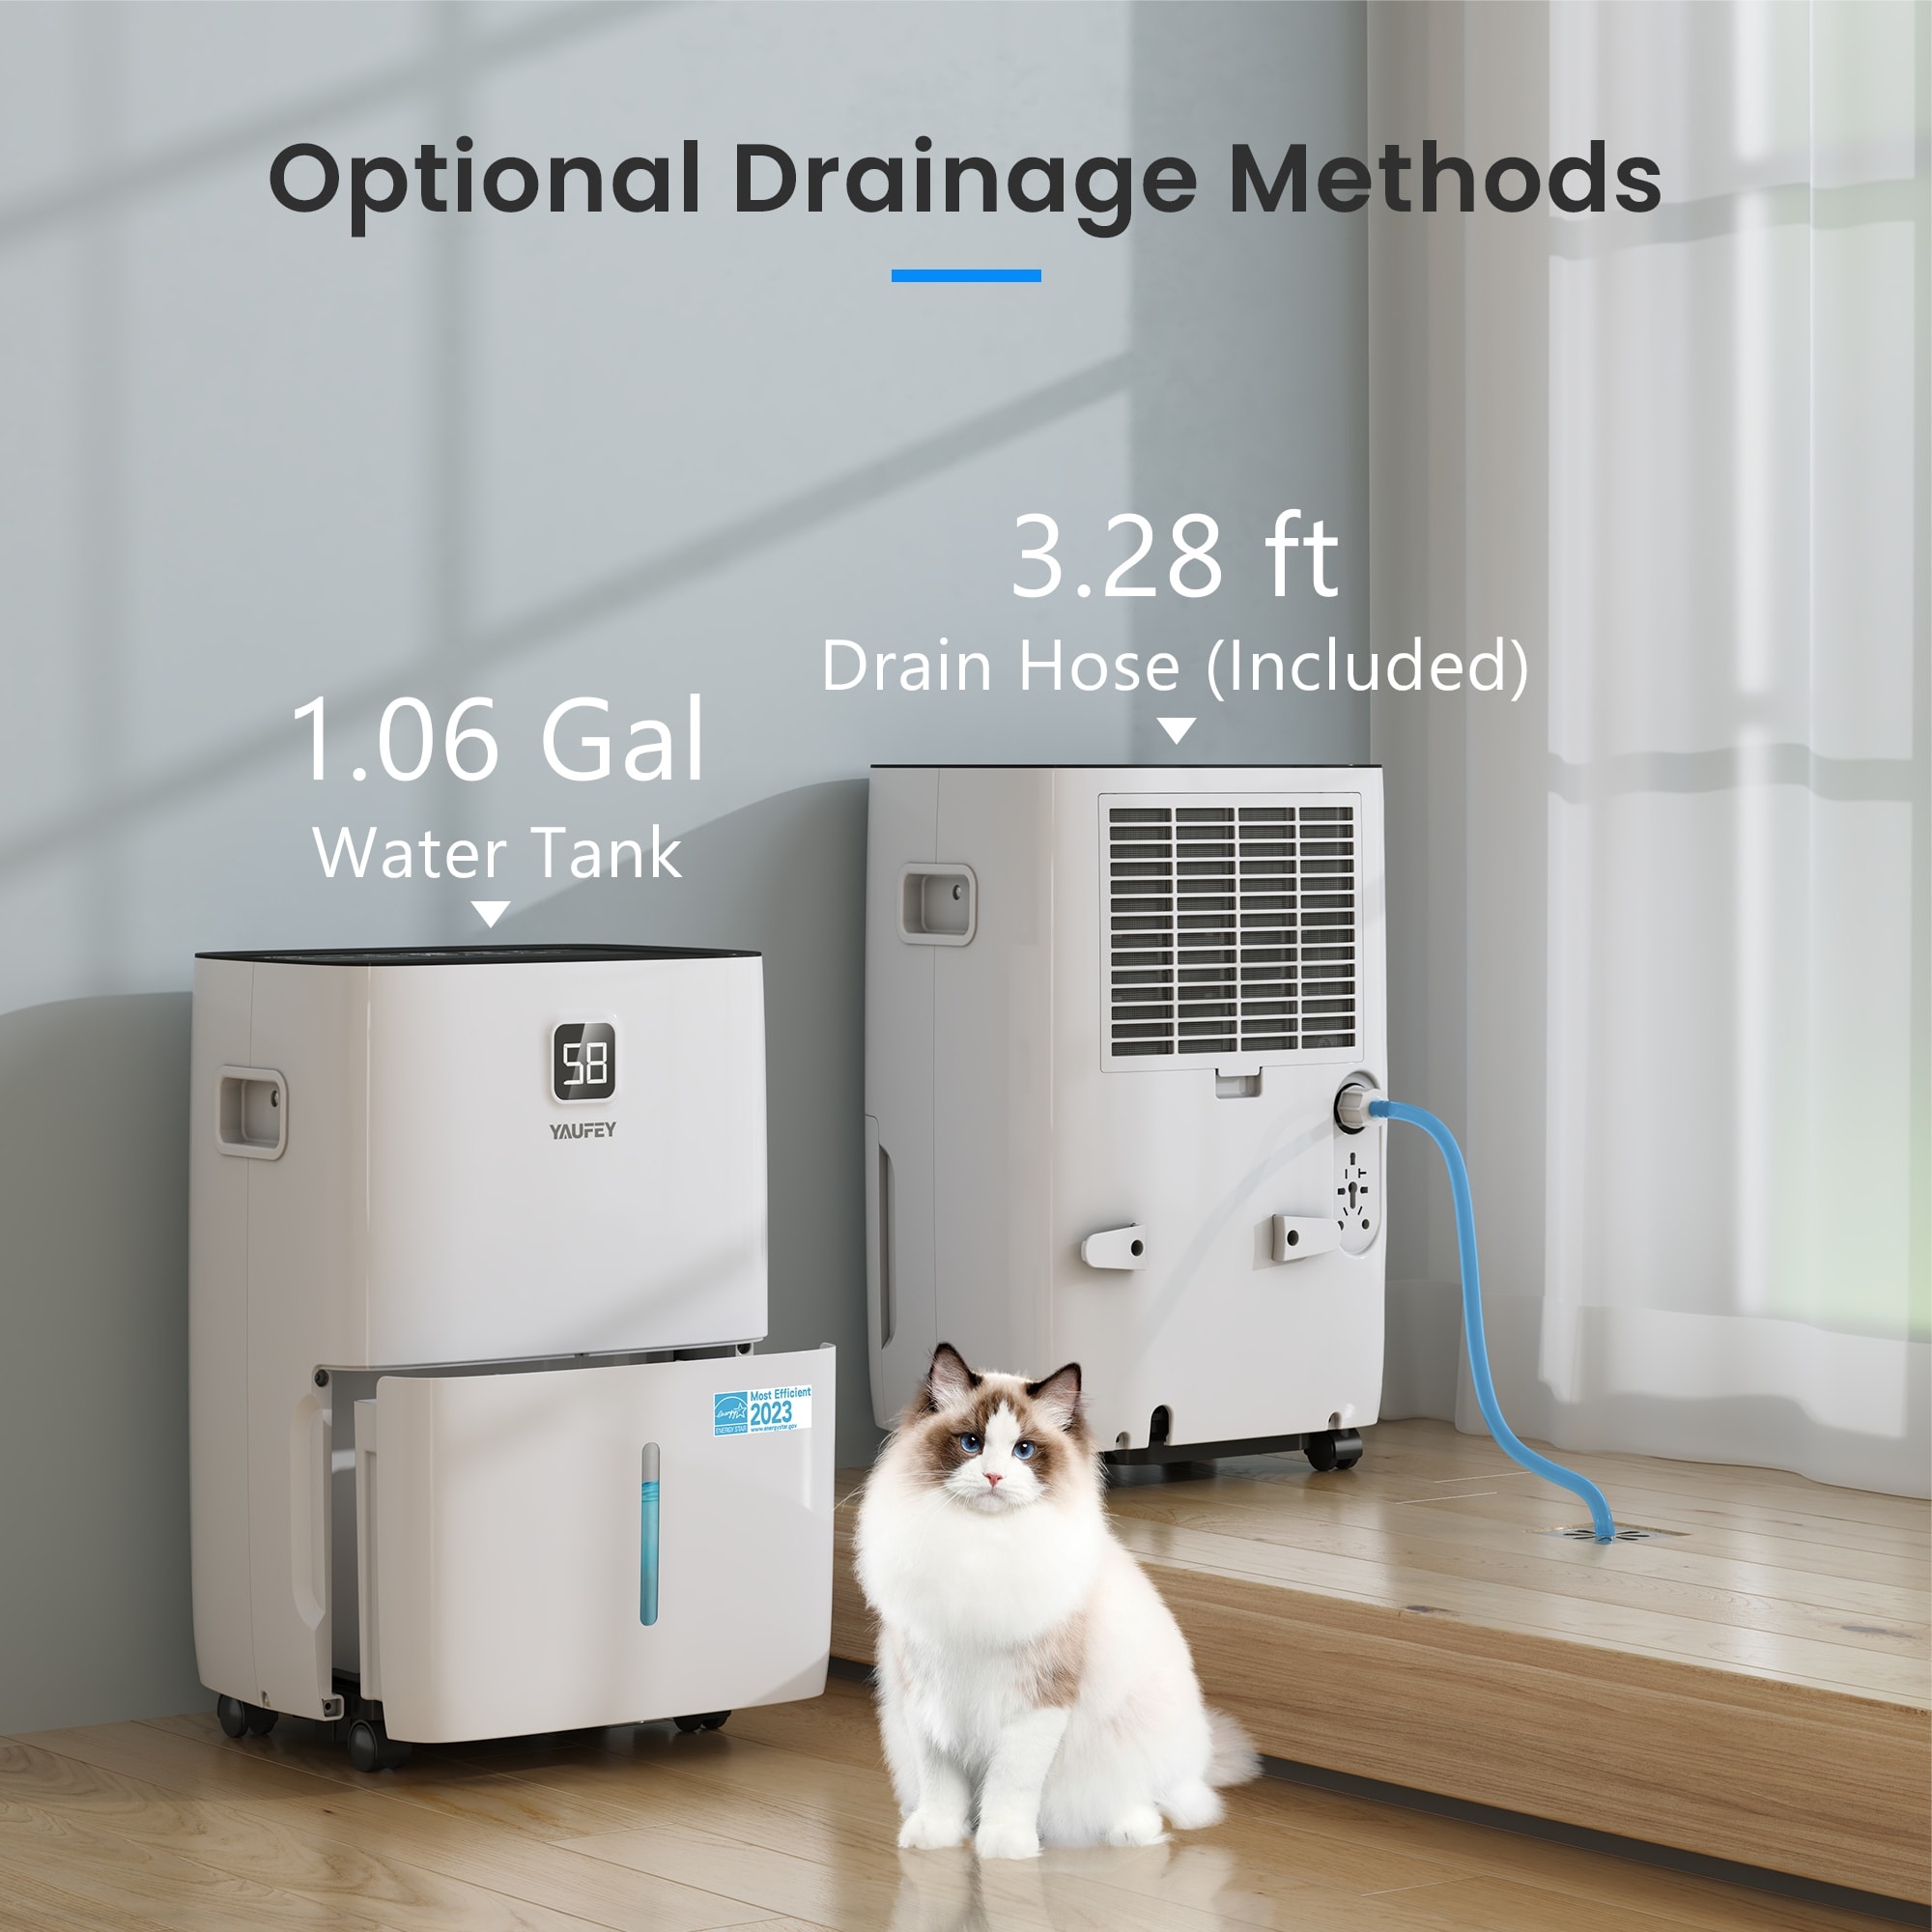 Yaufey 120-Pint Energy Star Dehumidifier for Home, Basement and Large Rooms  up to 6000 Sq. Ft, Powerful and Quiet - Bed Bath & Beyond - 39393017